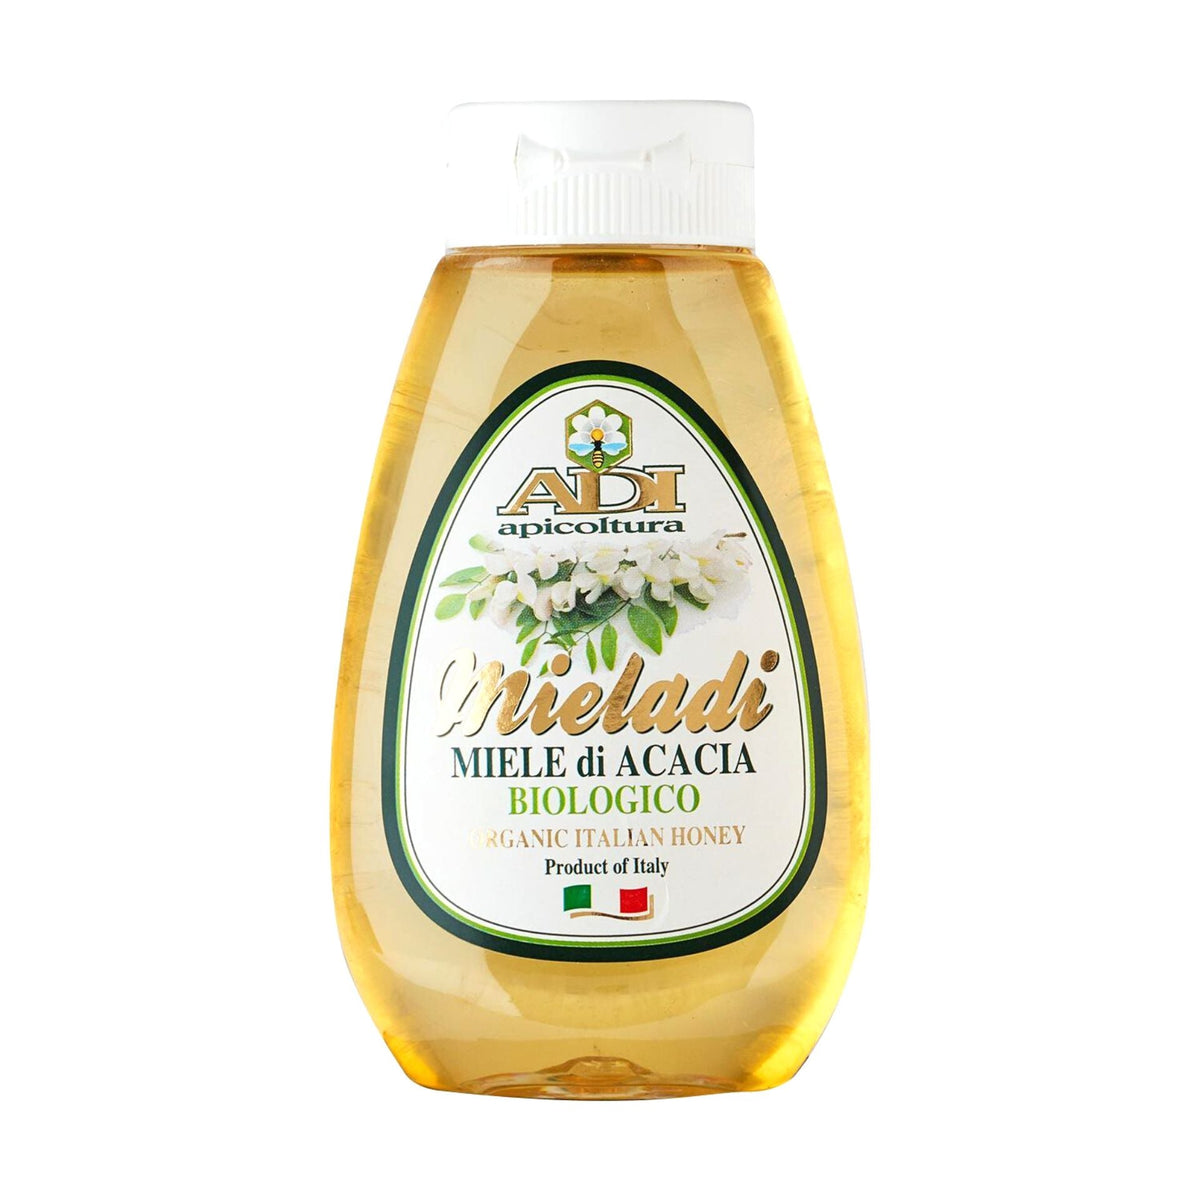 Adi Apicoltori Organic Acacia Honey (plastic bottle) 250g  | Imported and distributed in the UK by Just Gourmet Foods